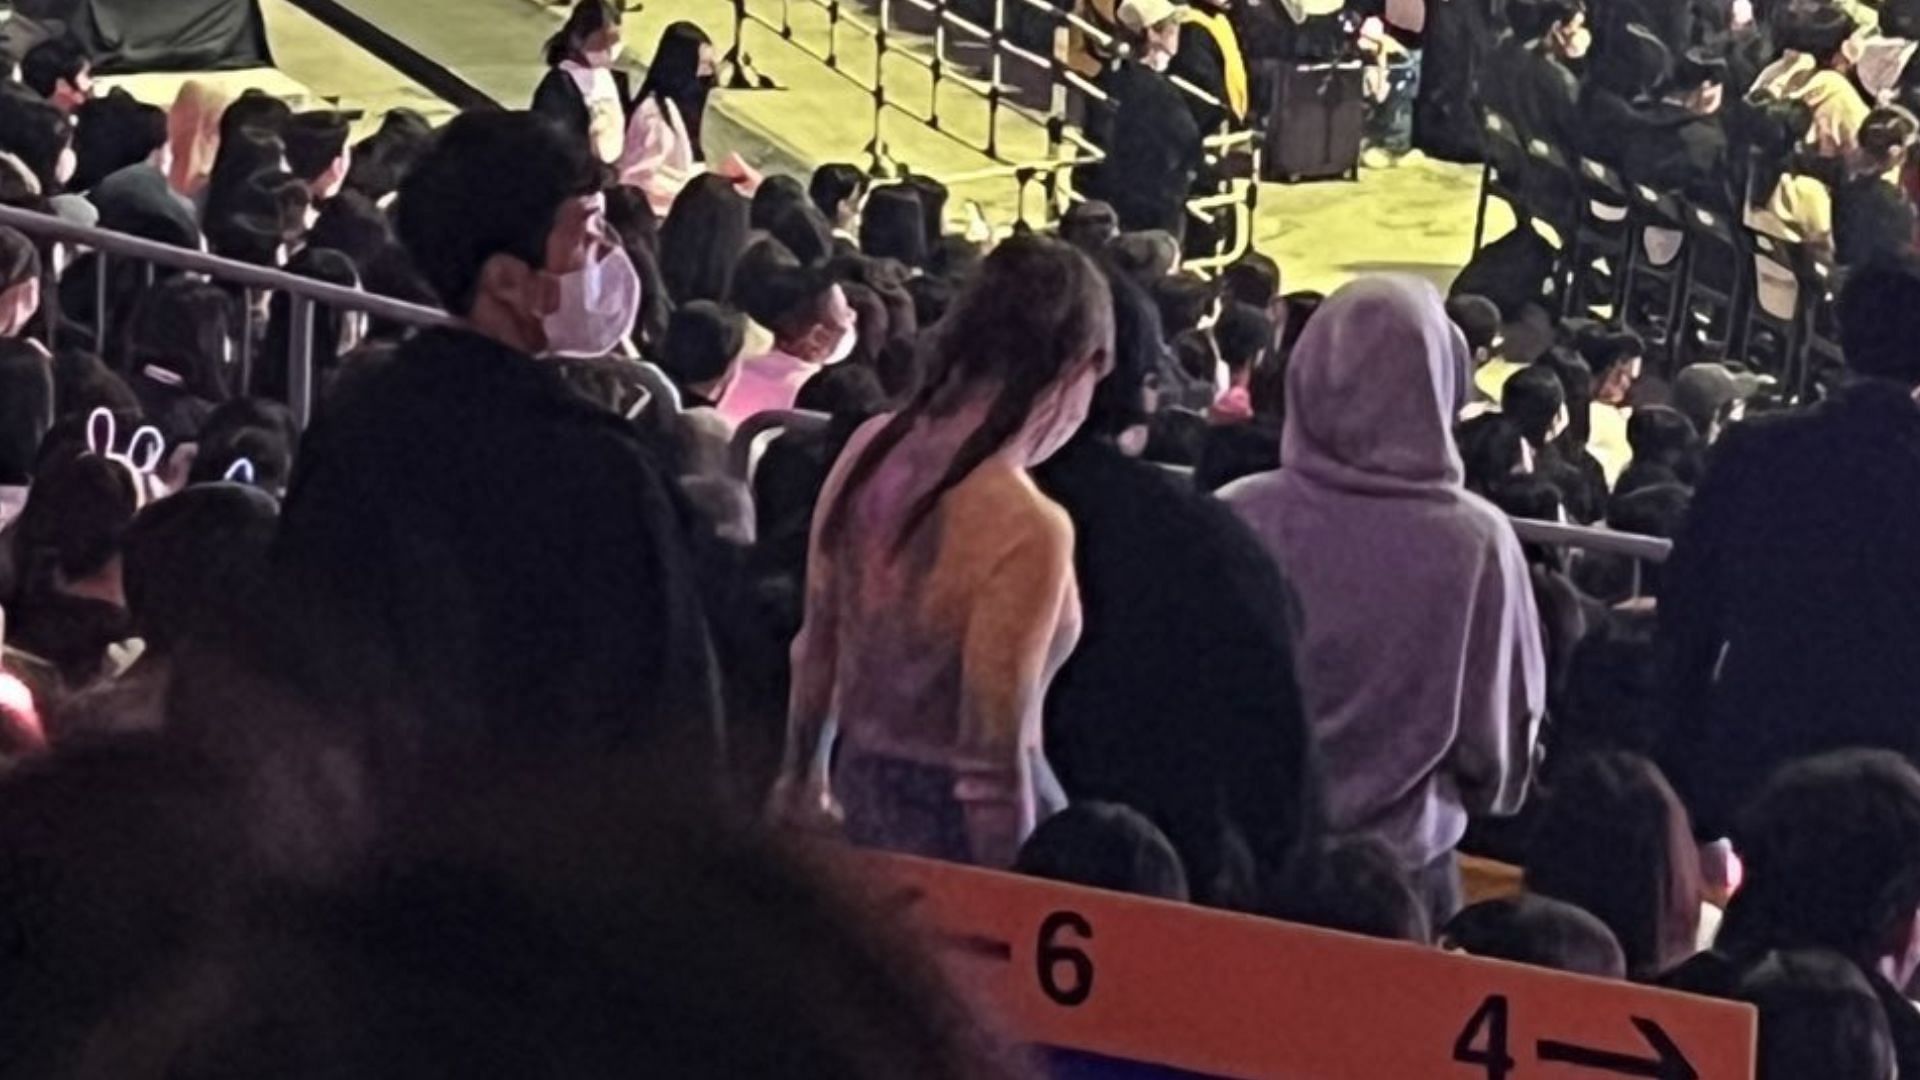 TWICE member Nayeon was also spotted attending BLACKPINK&#039;s concert on day 1 (Image via Twitter/imyeonnz)